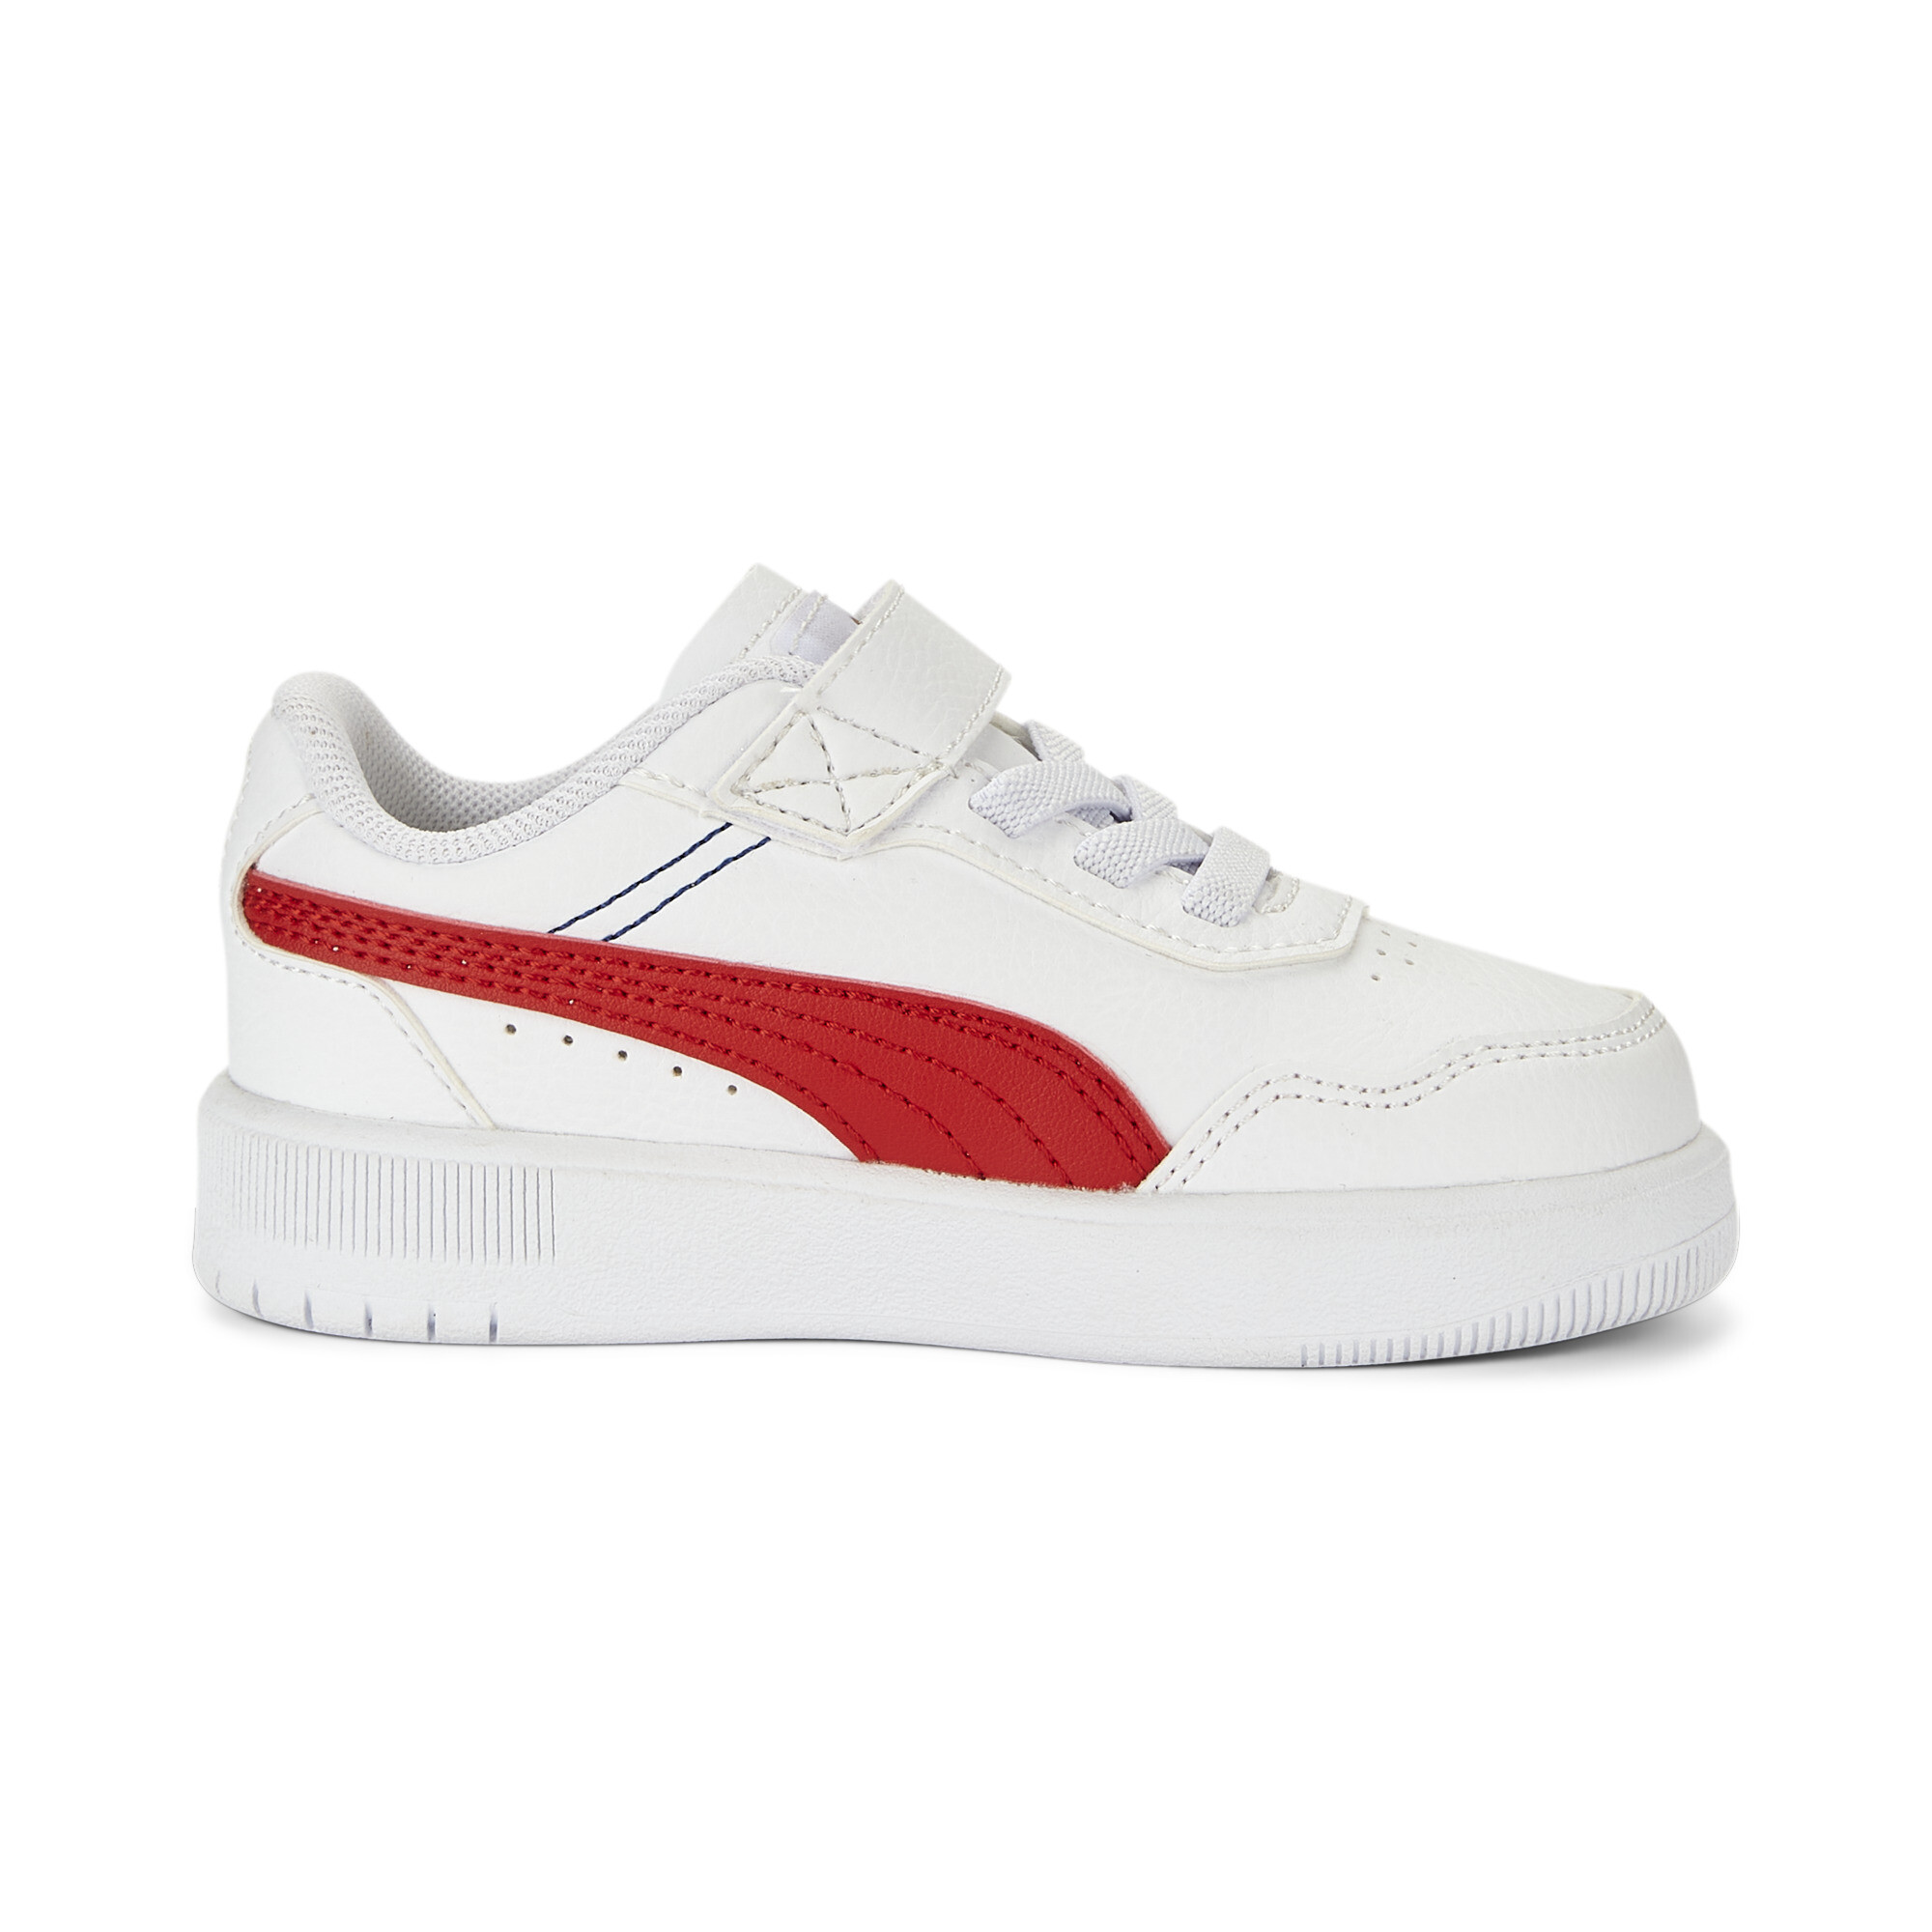 Kids' PUMA Court Ultra Shoes Baby In 20 - White, Size EU 26